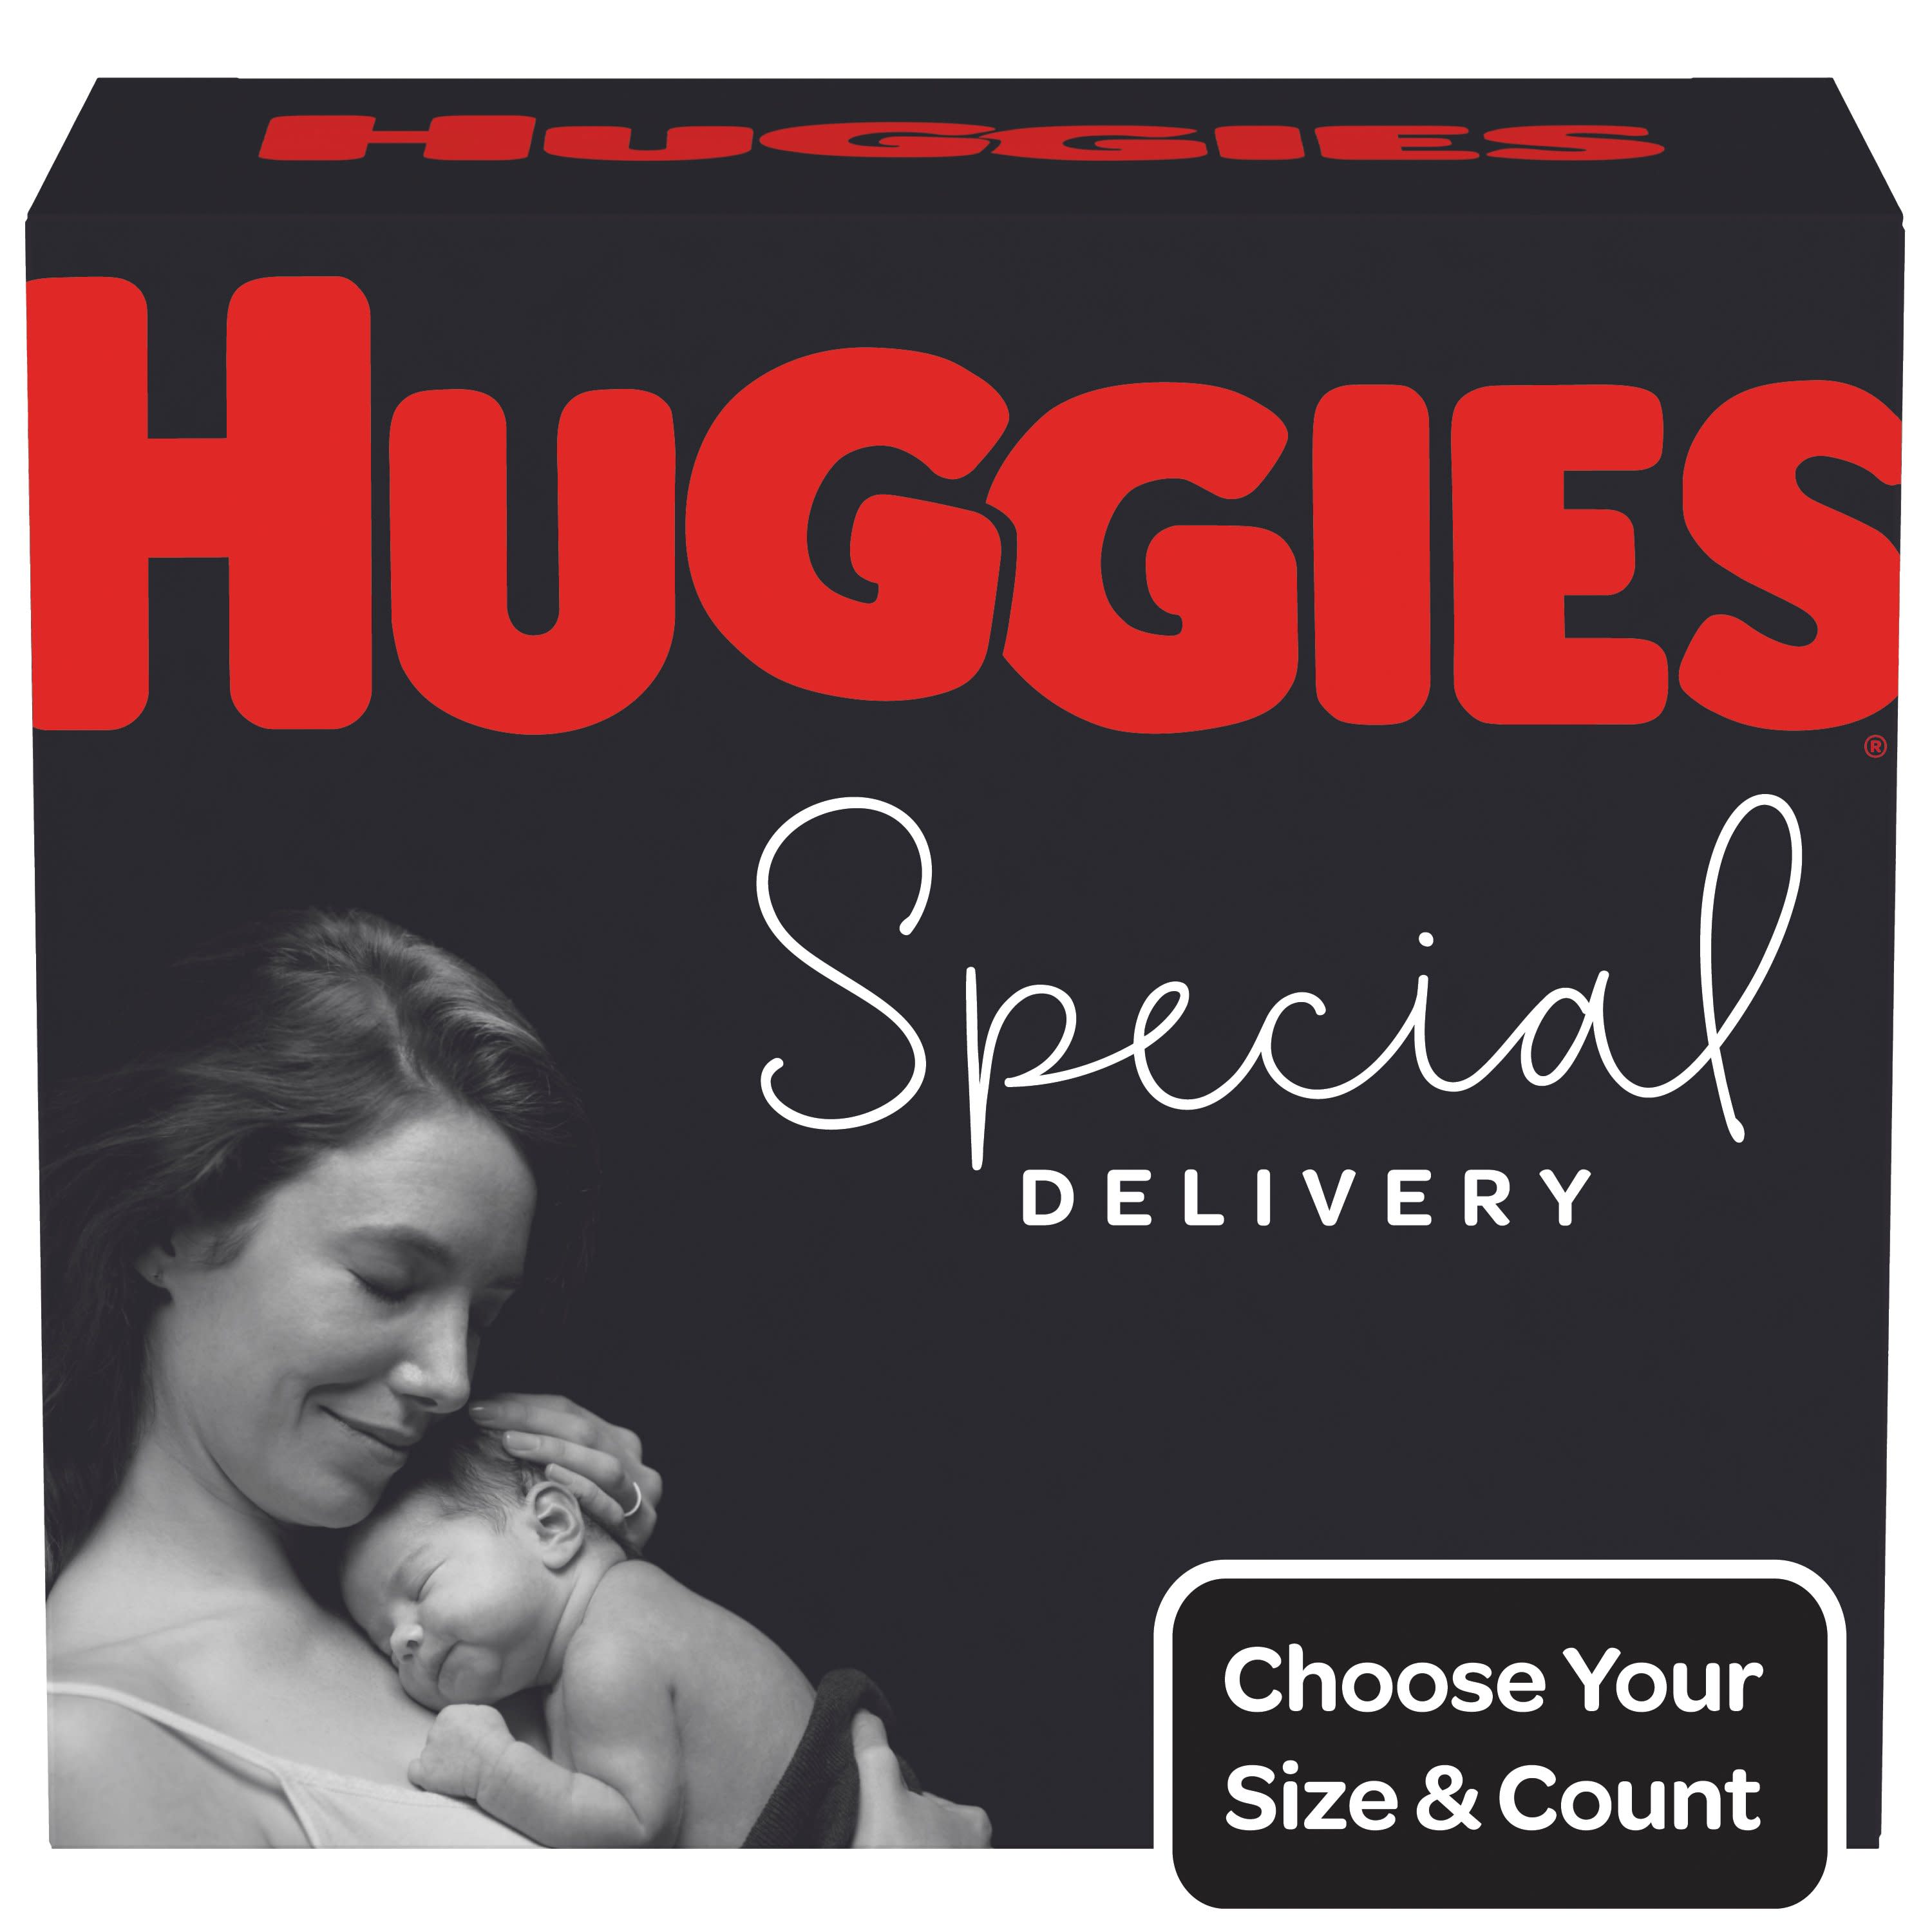 Huggies Special Delivery Hypoallergenic Newborn Baby Diapers, 76 Ct - image 1 of 10